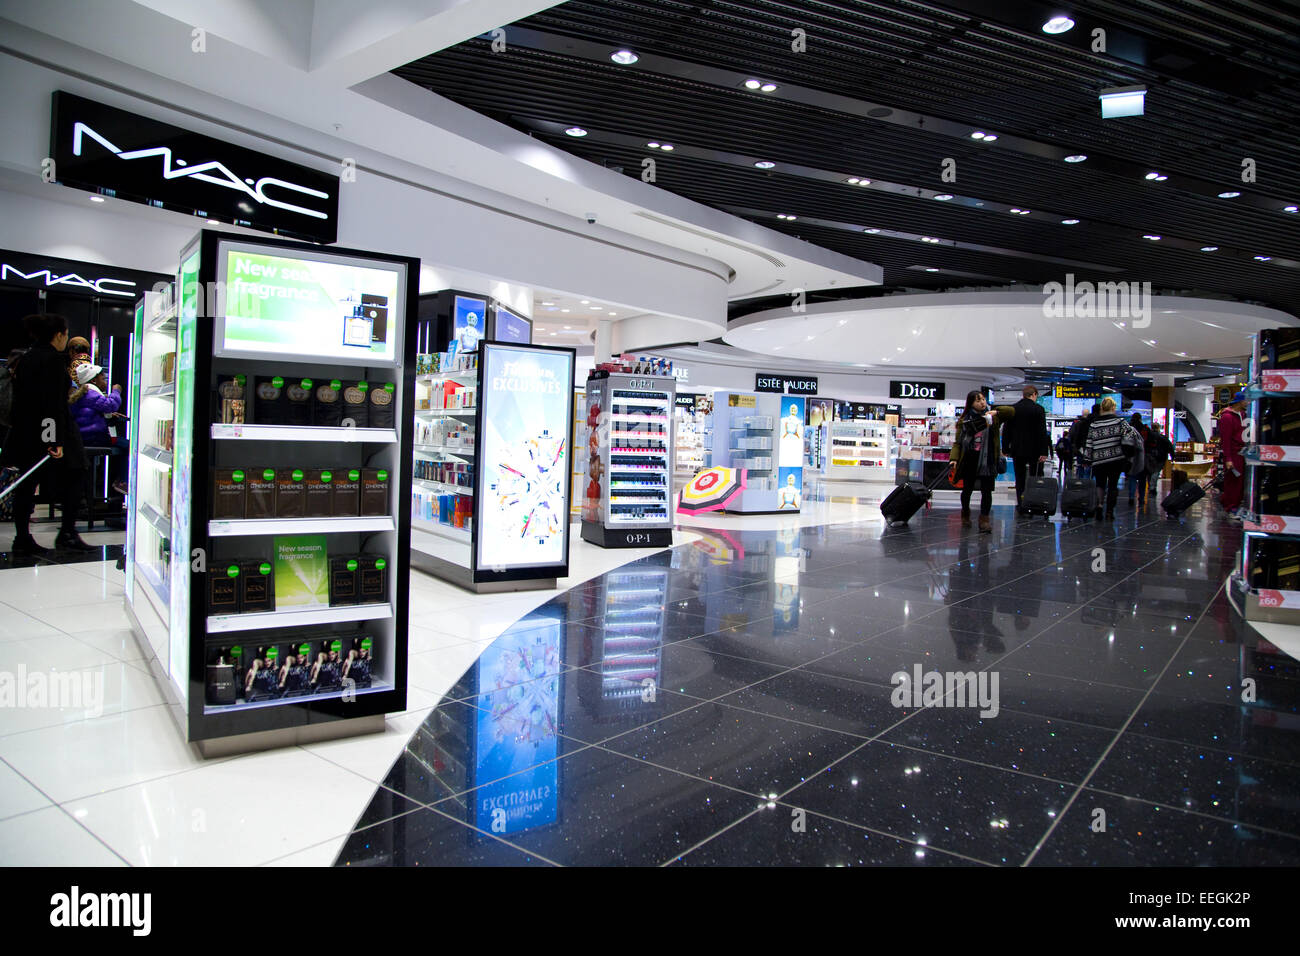 LONDON - JANUARY 9TH: The interior of Stanstead airport duty free section on January the 9th, 2015 in London, england, uk. Stans Stock Photo